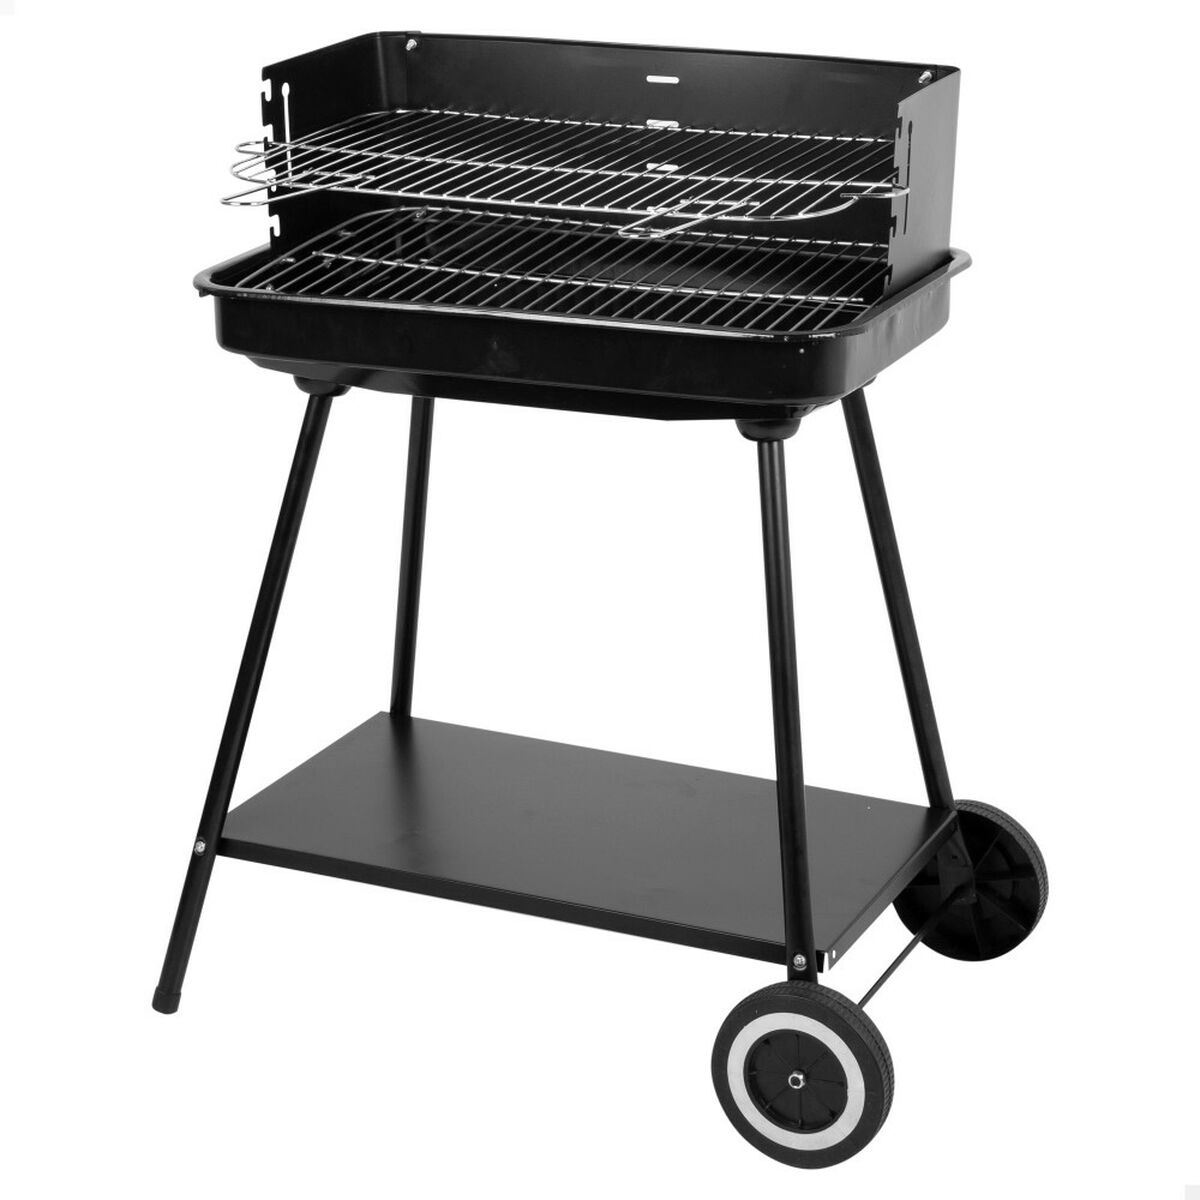 Barbecue Portable Aktive Stainless steel Steel 55 x 82 x 43 cm